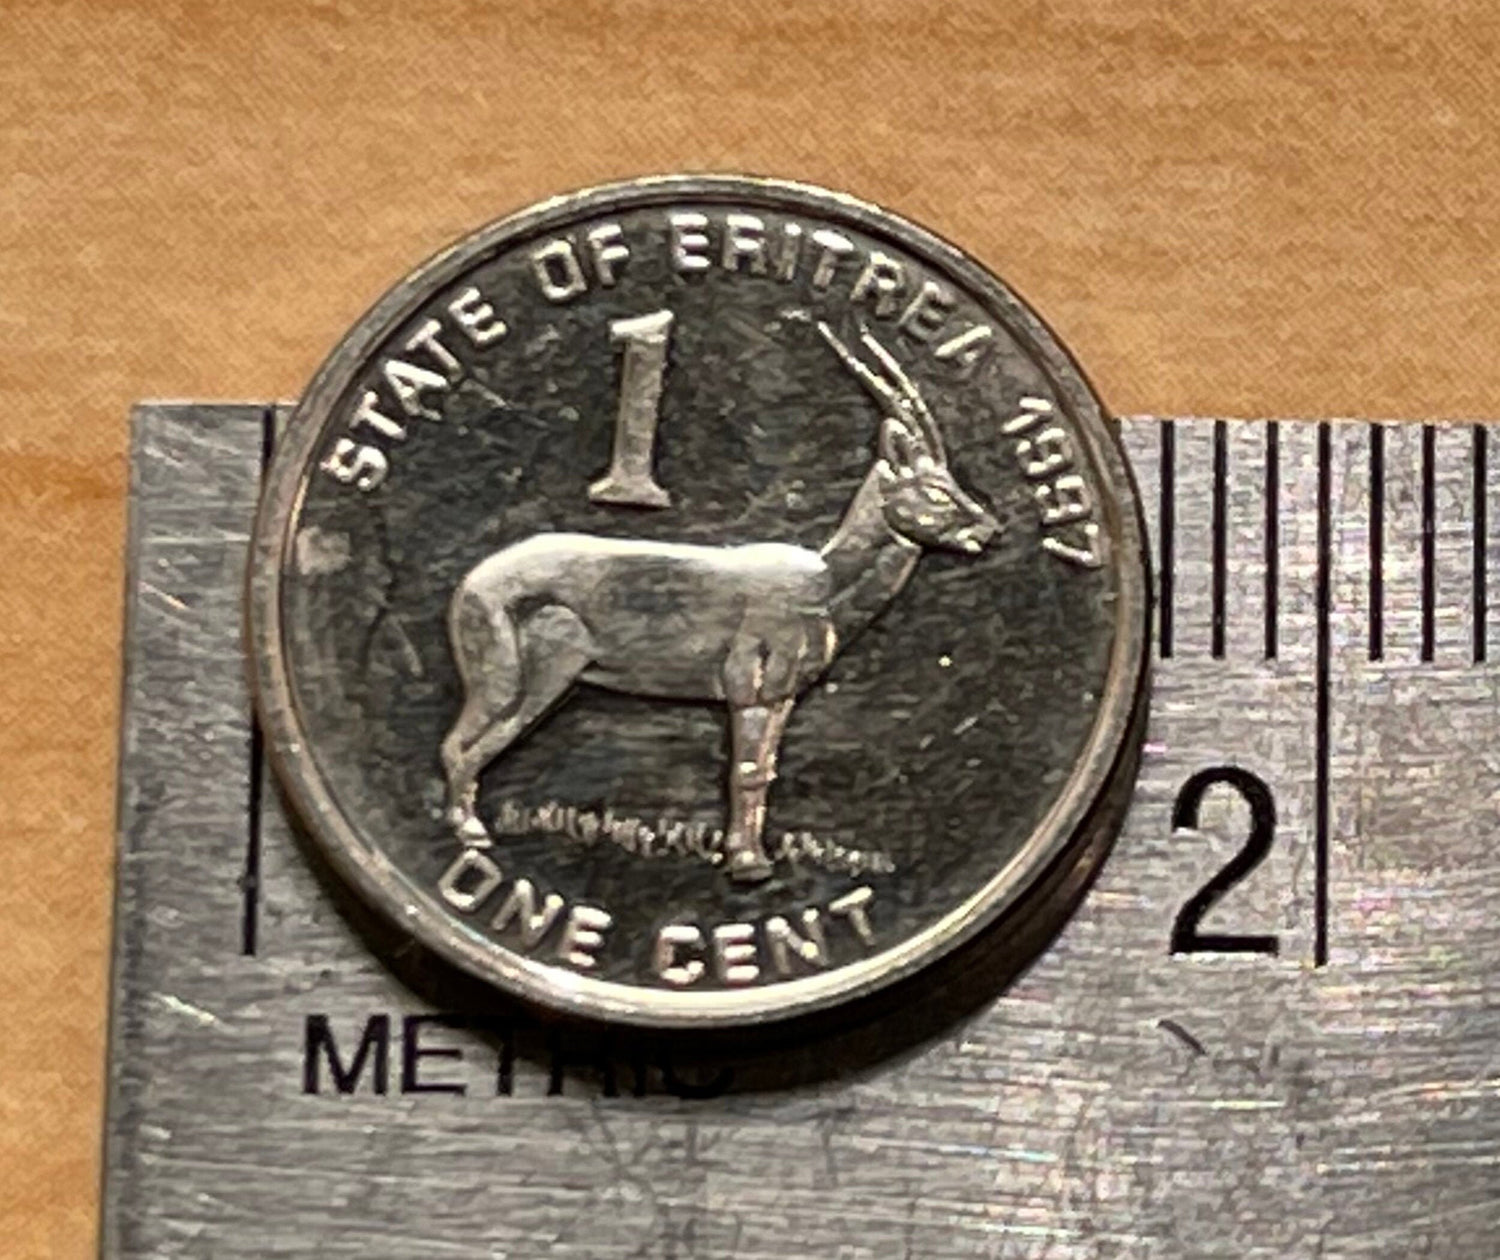 Red-Fronted Gazelle & Liberty Equality Justice Penny Eritrea Authentic Coin Money for Jewelry and Craft Making